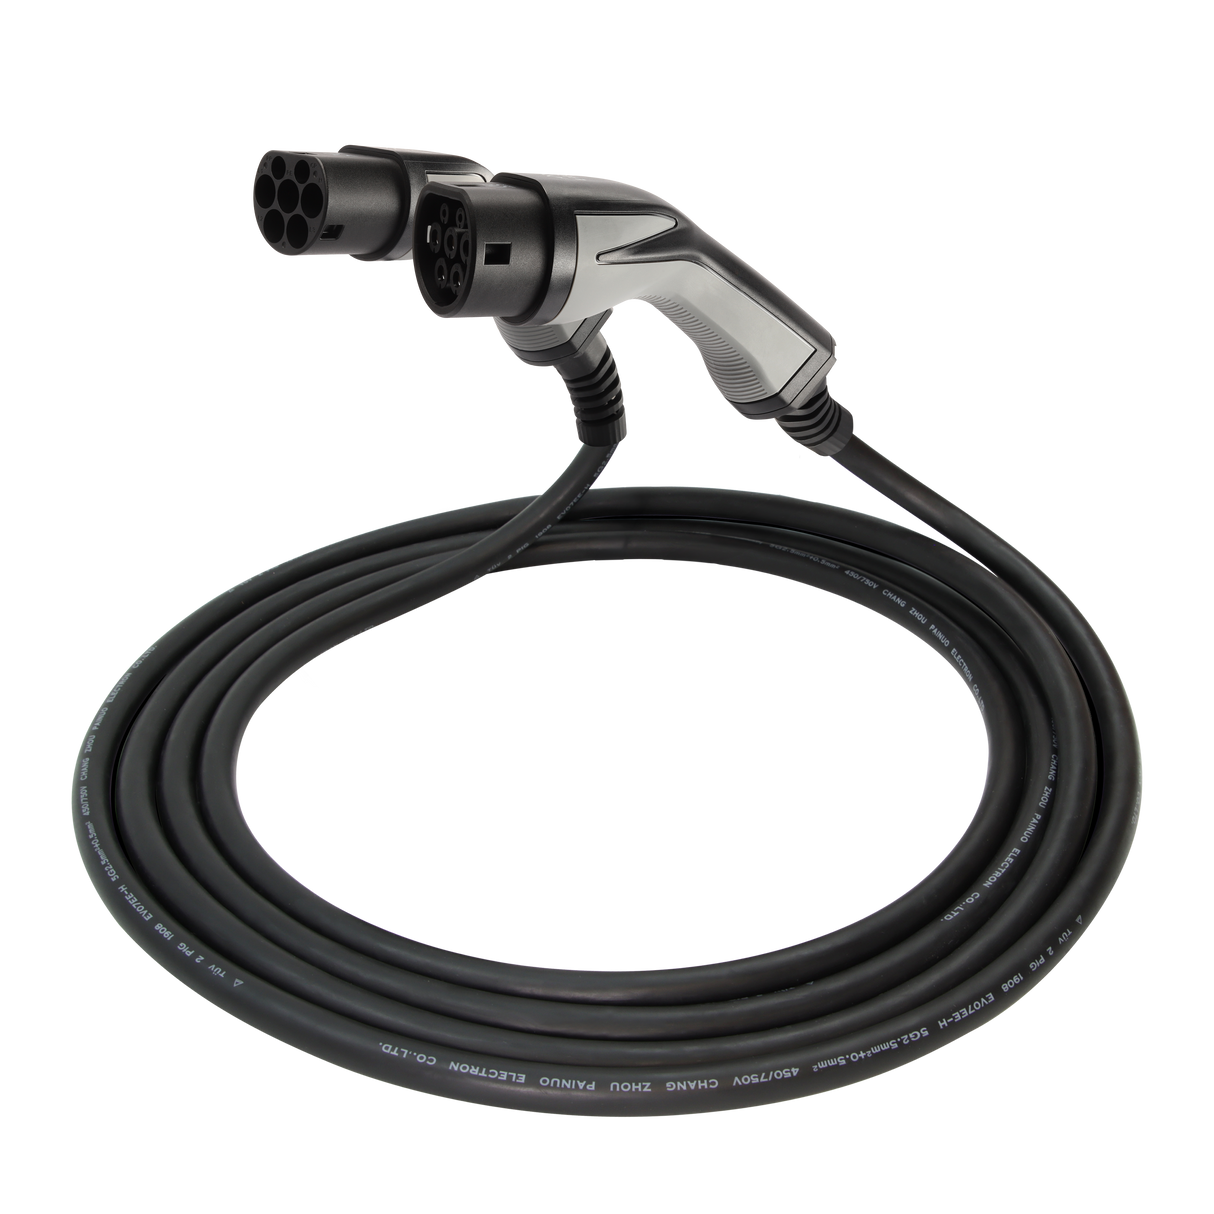 Charging cable Volvo C40 - Erock Pro Type 2 - 16A 3 phase (11 kW)